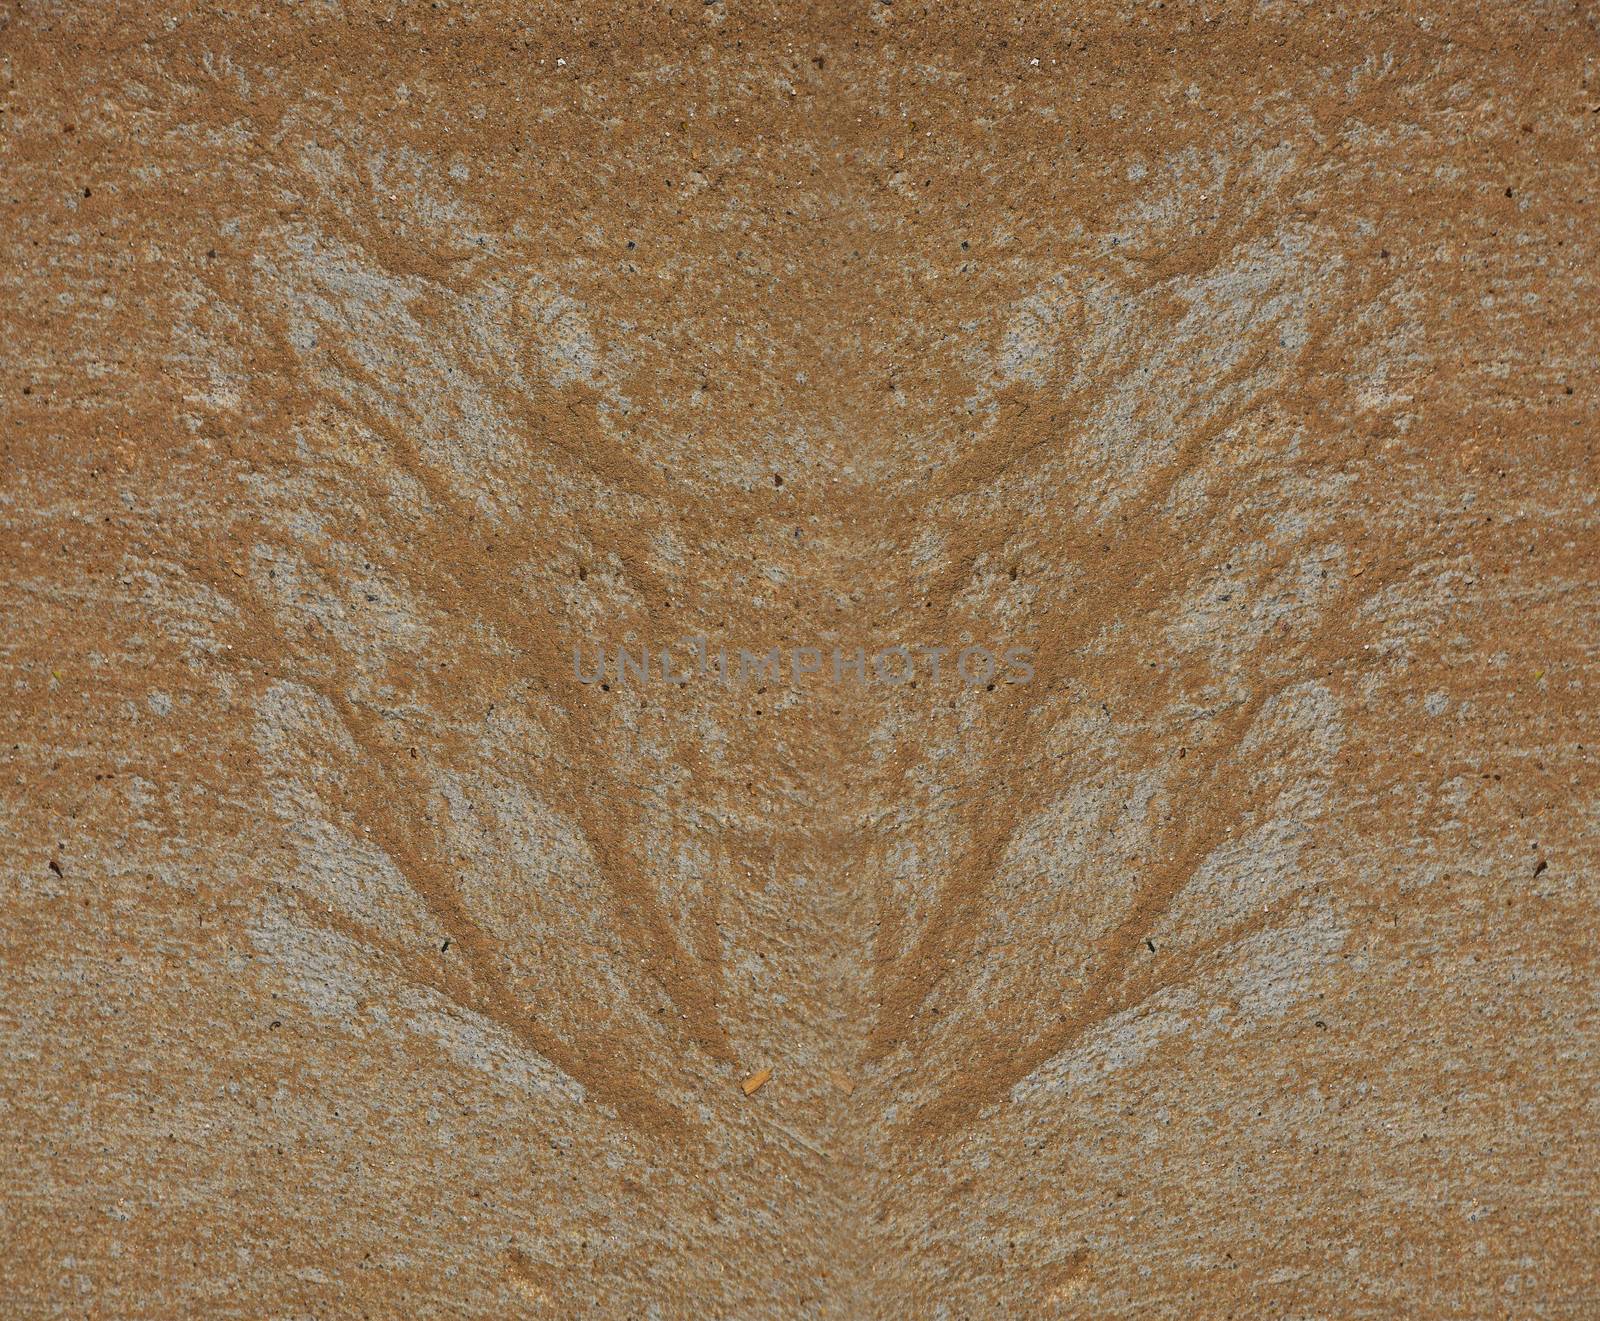 Silhouette of butterfly wings made of sand and gravel by water f by BreakingTheWalls